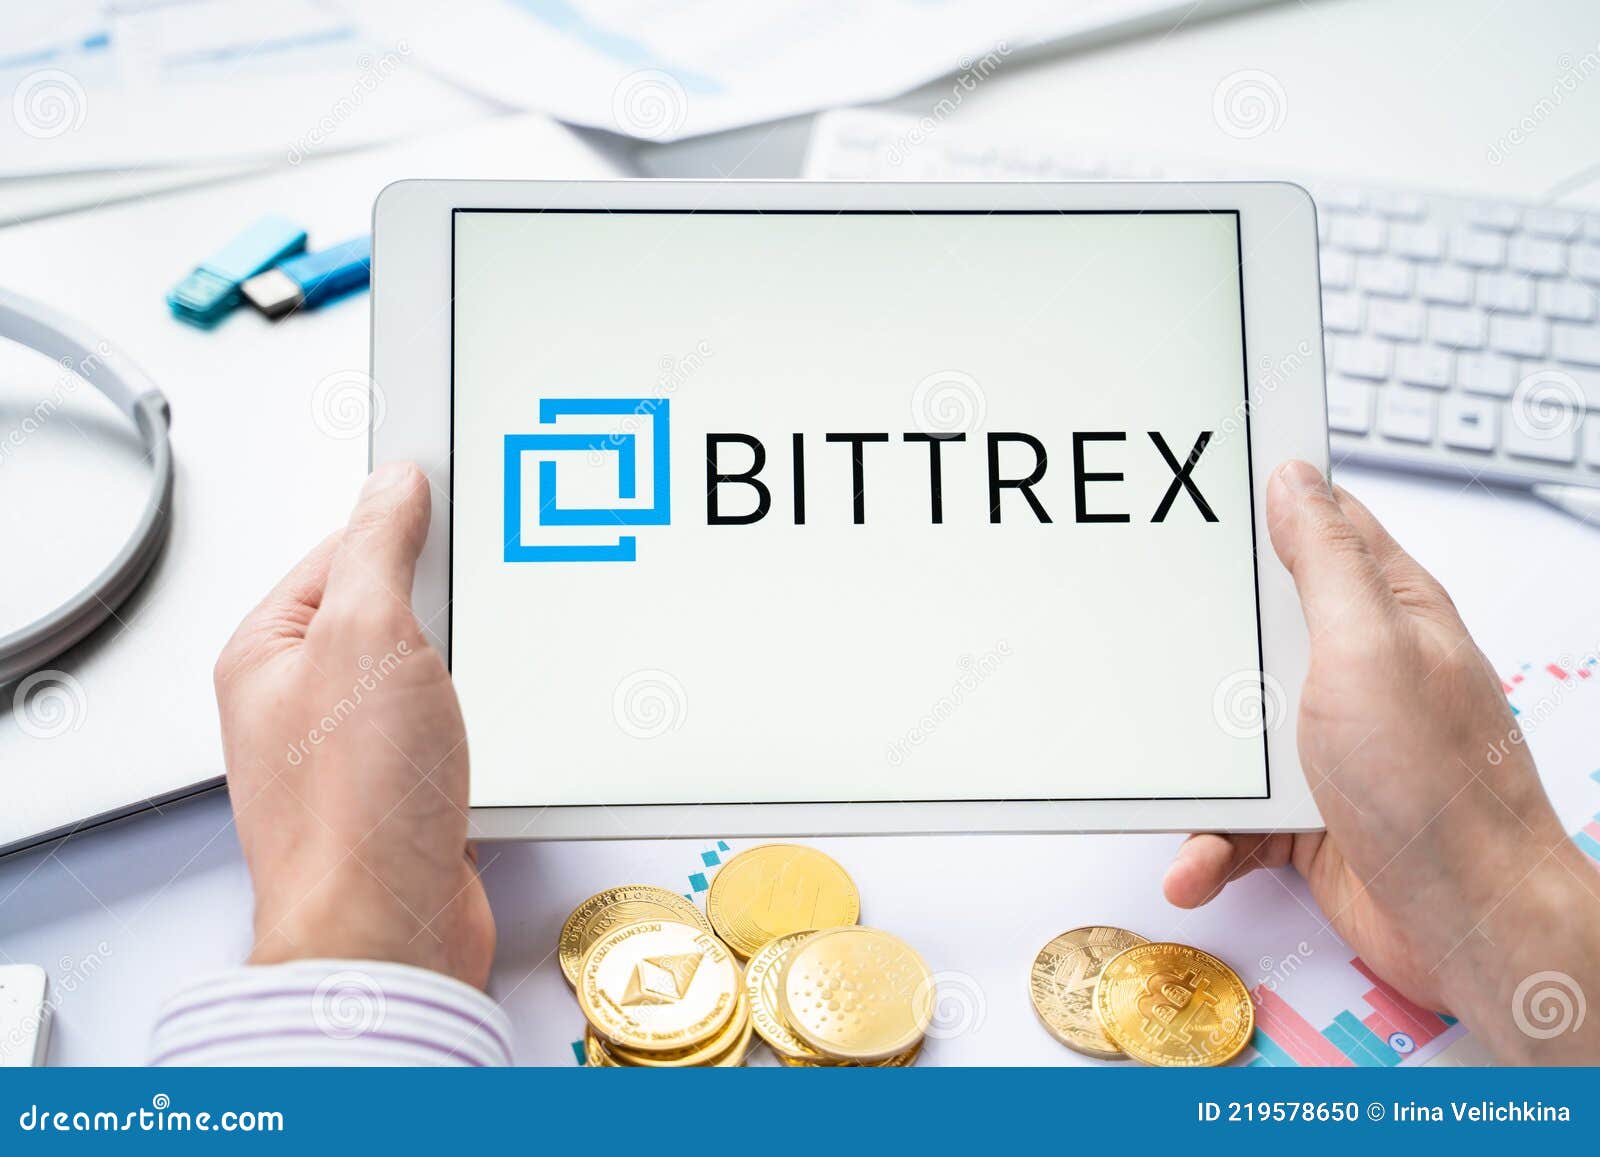 Bittrex Review - What Is Bittrex and How to Use it